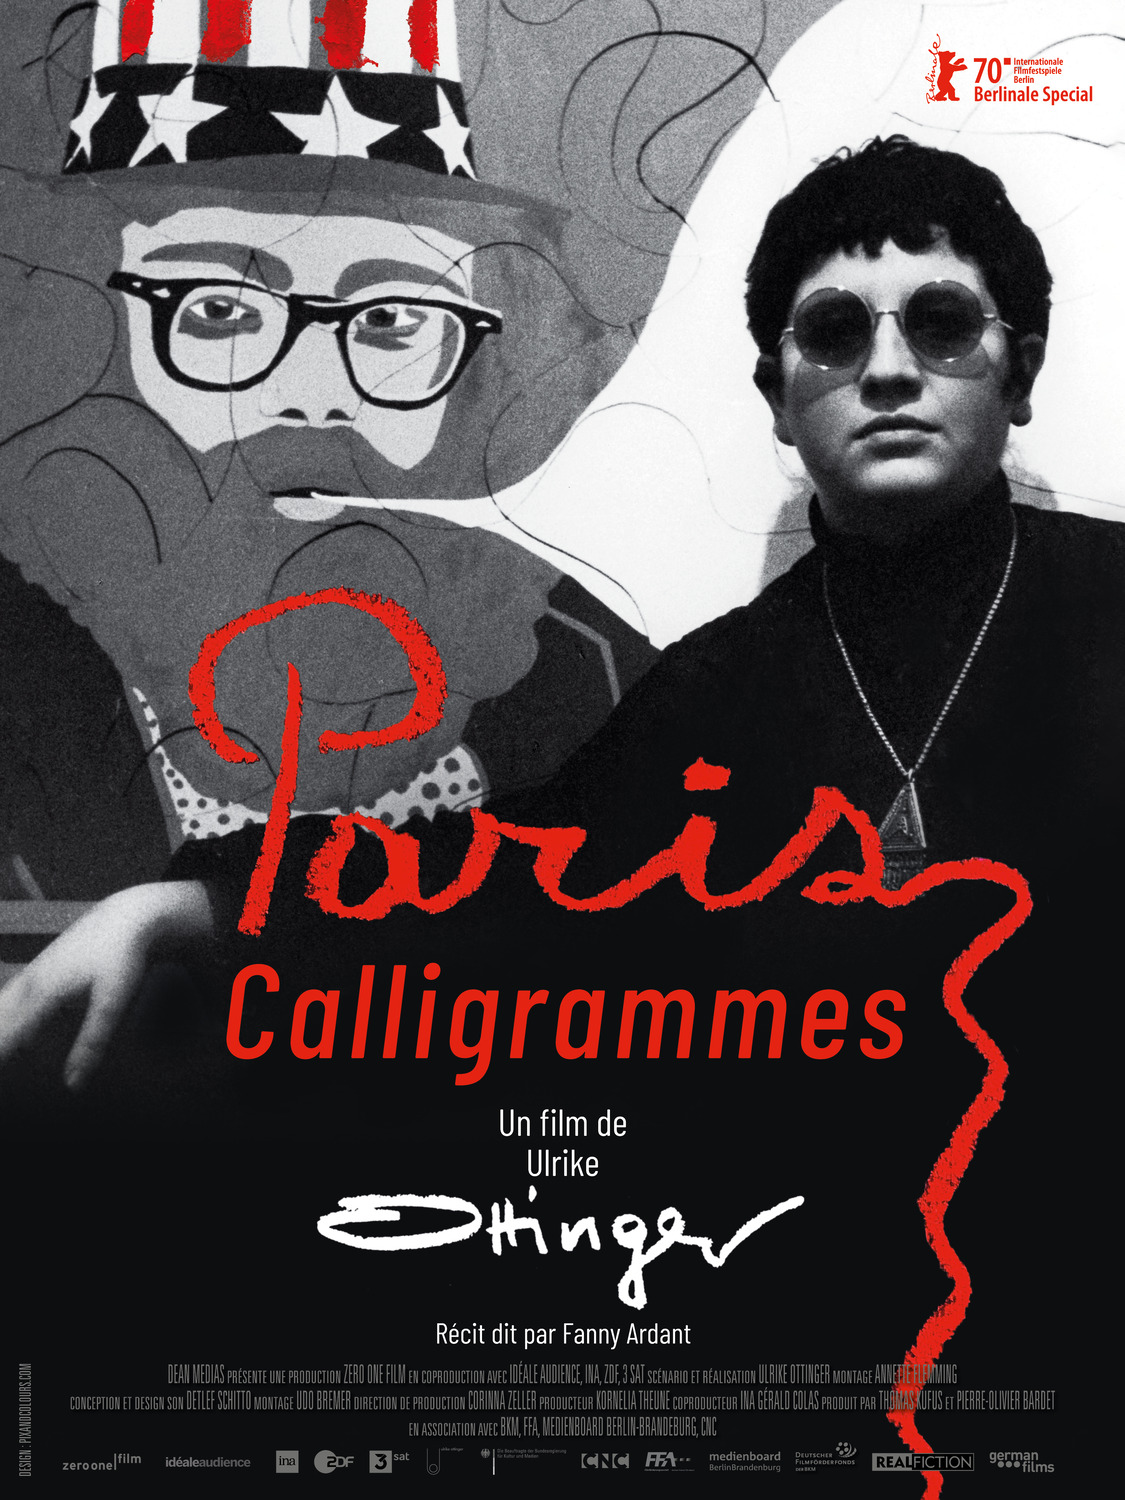 Extra Large Movie Poster Image for Paris Calligrammes 